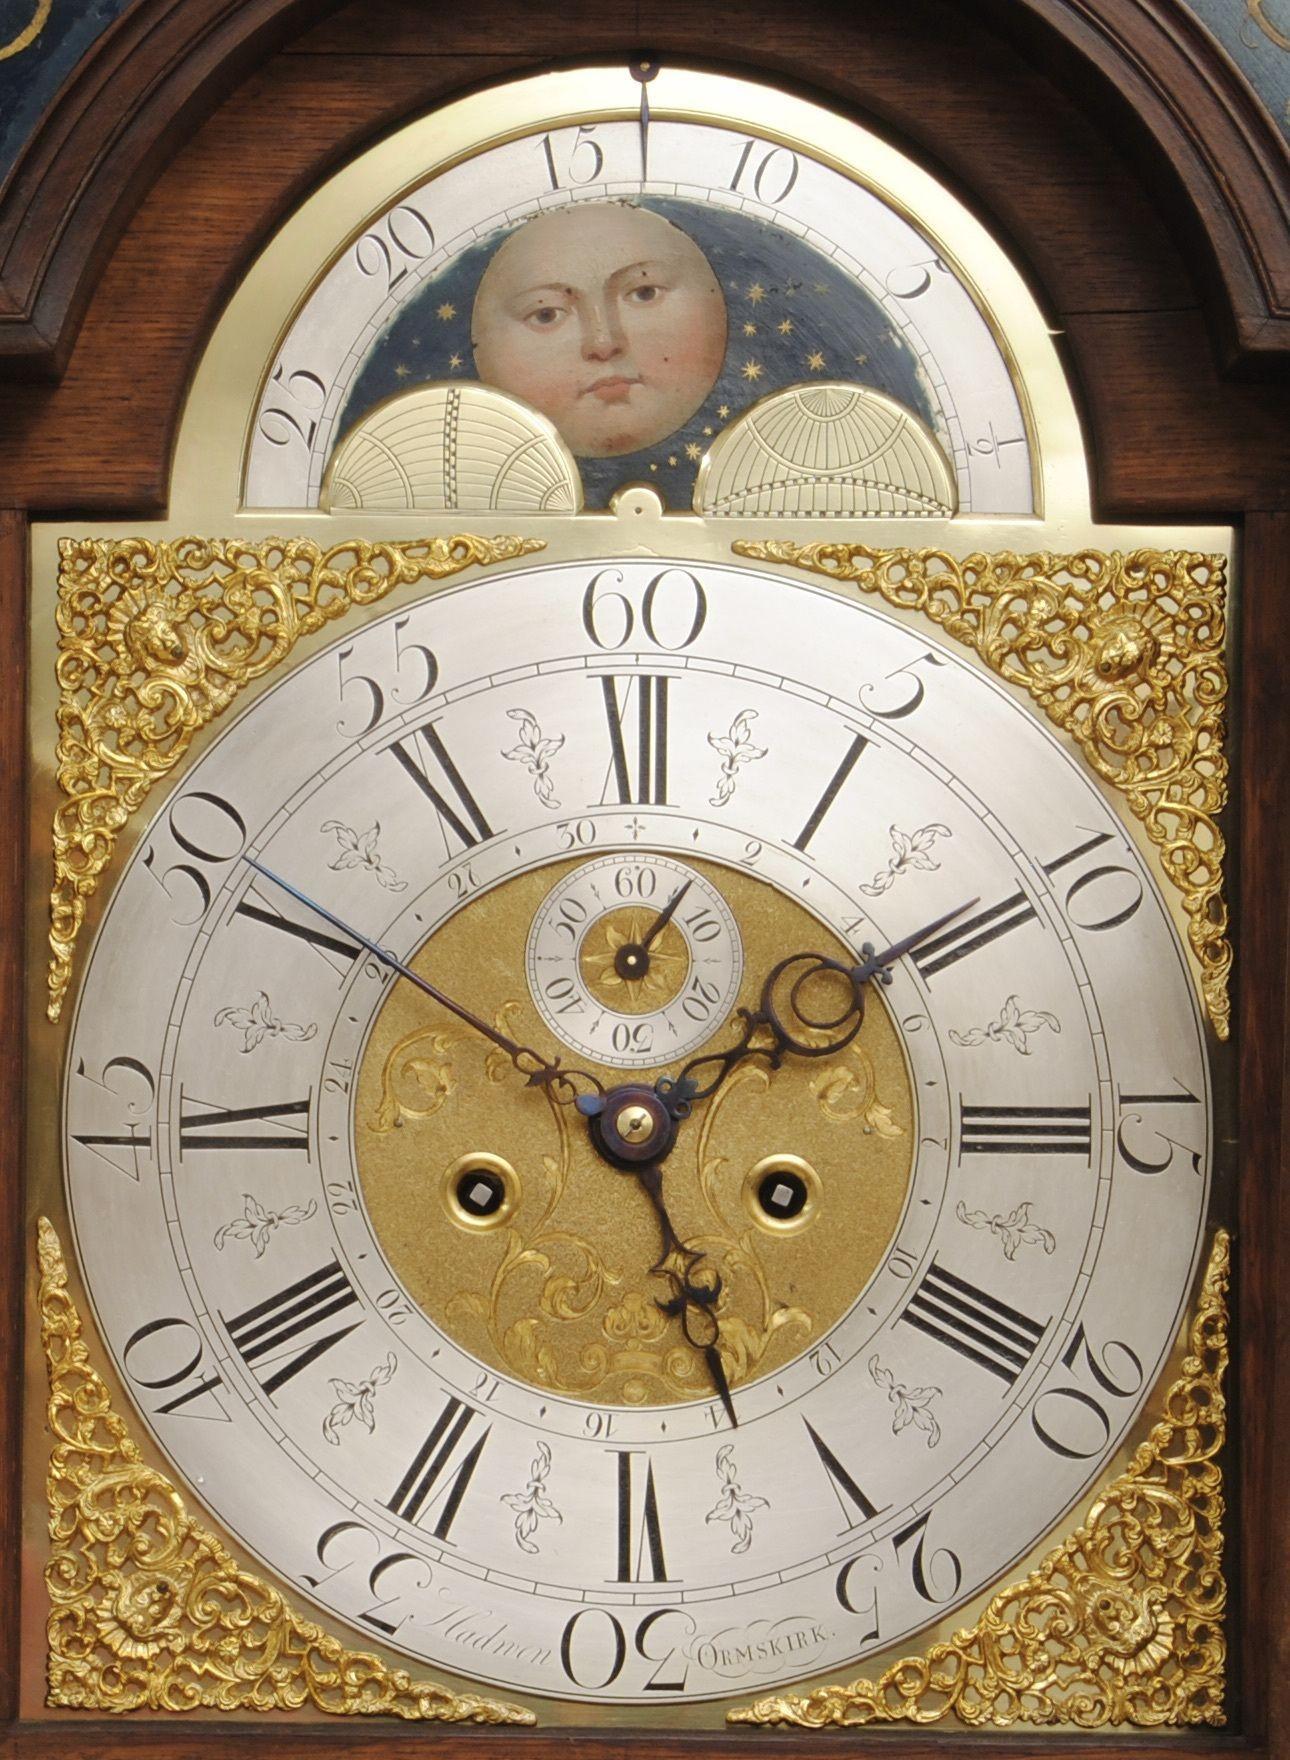 Fine and Elegant 18th Century Mahogany Longcase Clock In Excellent Condition For Sale In Lincolnshire, GB